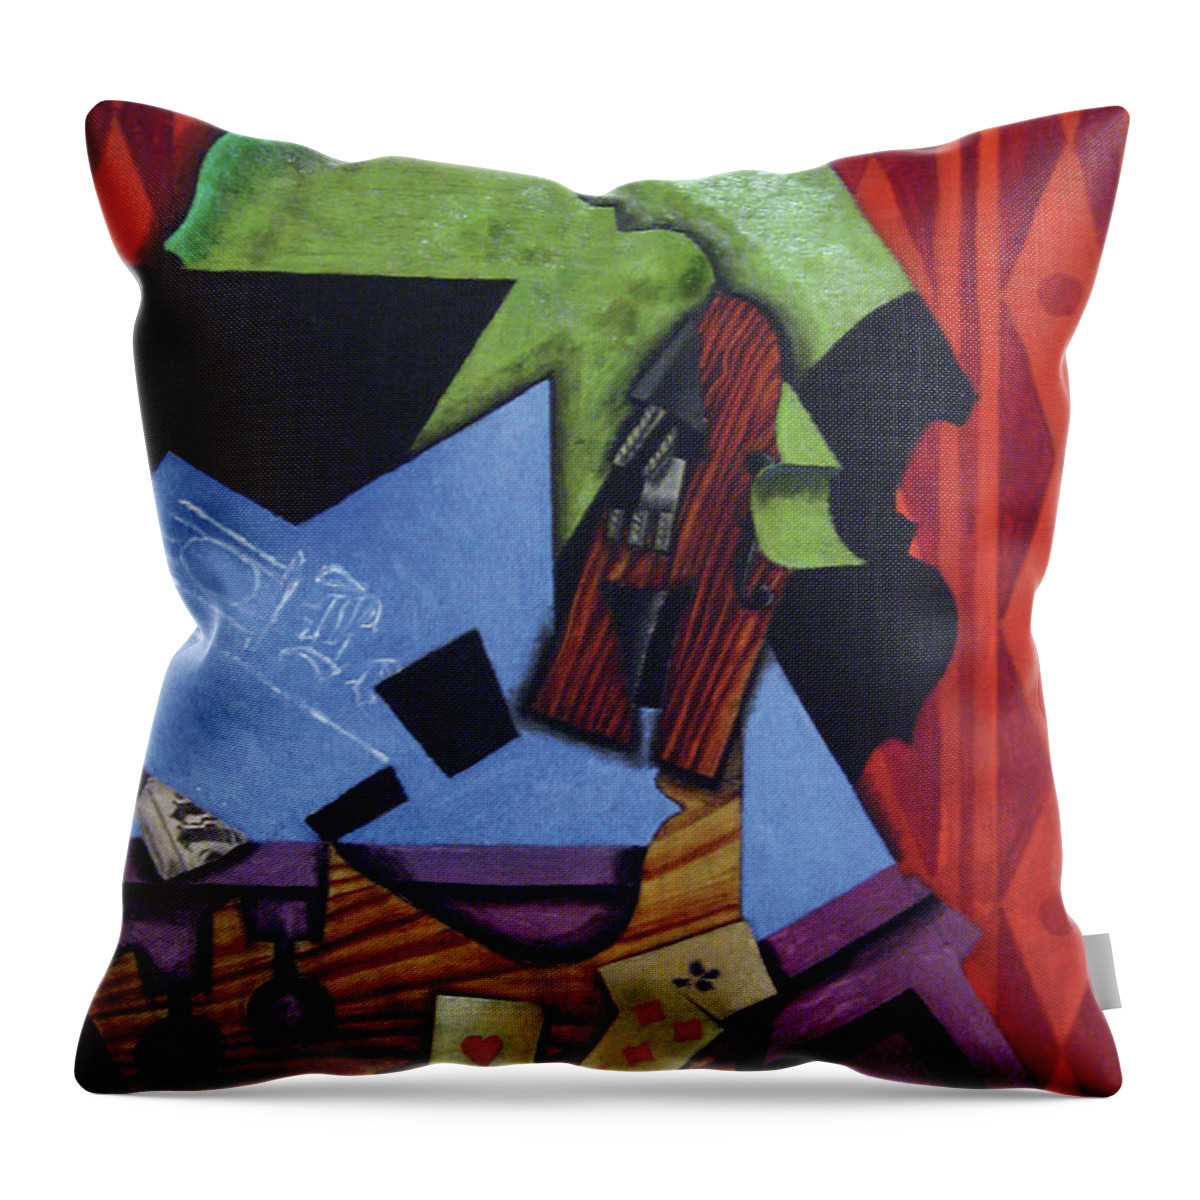 Violin Throw Pillow featuring the painting Violin & Playing Cards by Juan Gris